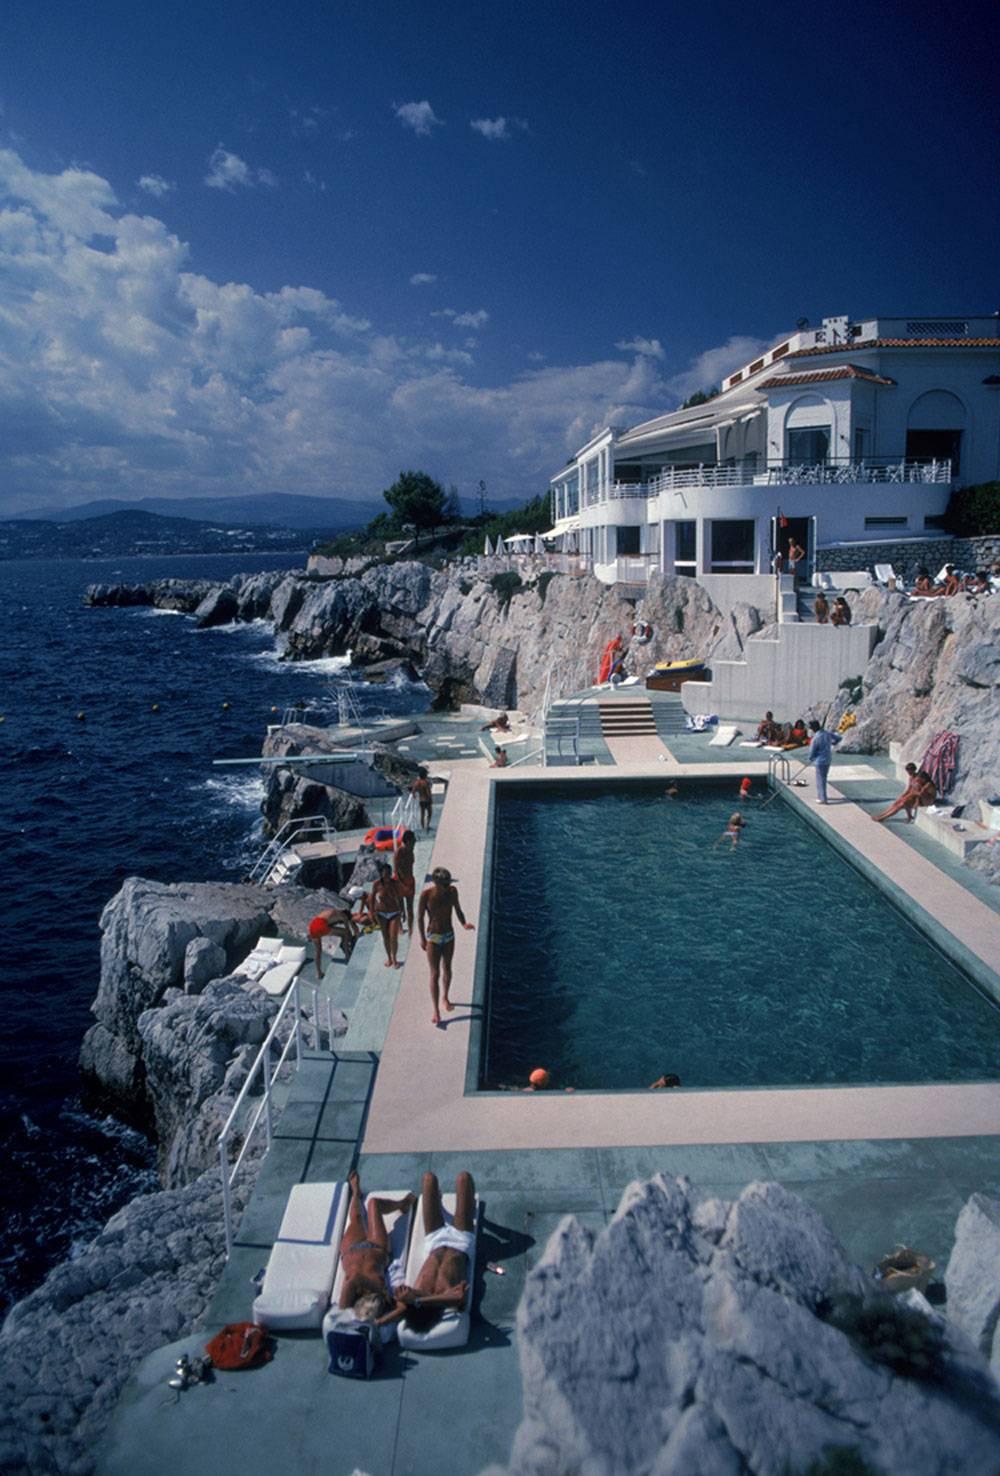 Bathers by the pool at the Hôtel du Cap Eden-Roc, Antibes, France, 1976.

48 x 72 inches
$7015

40 x 60 inches
$6210

30 x 40 inches
$4,830

20 x 30 inches
$4,485

Complimentary dealer shipping to your framer, worldwide.

Undercurrent Projects is